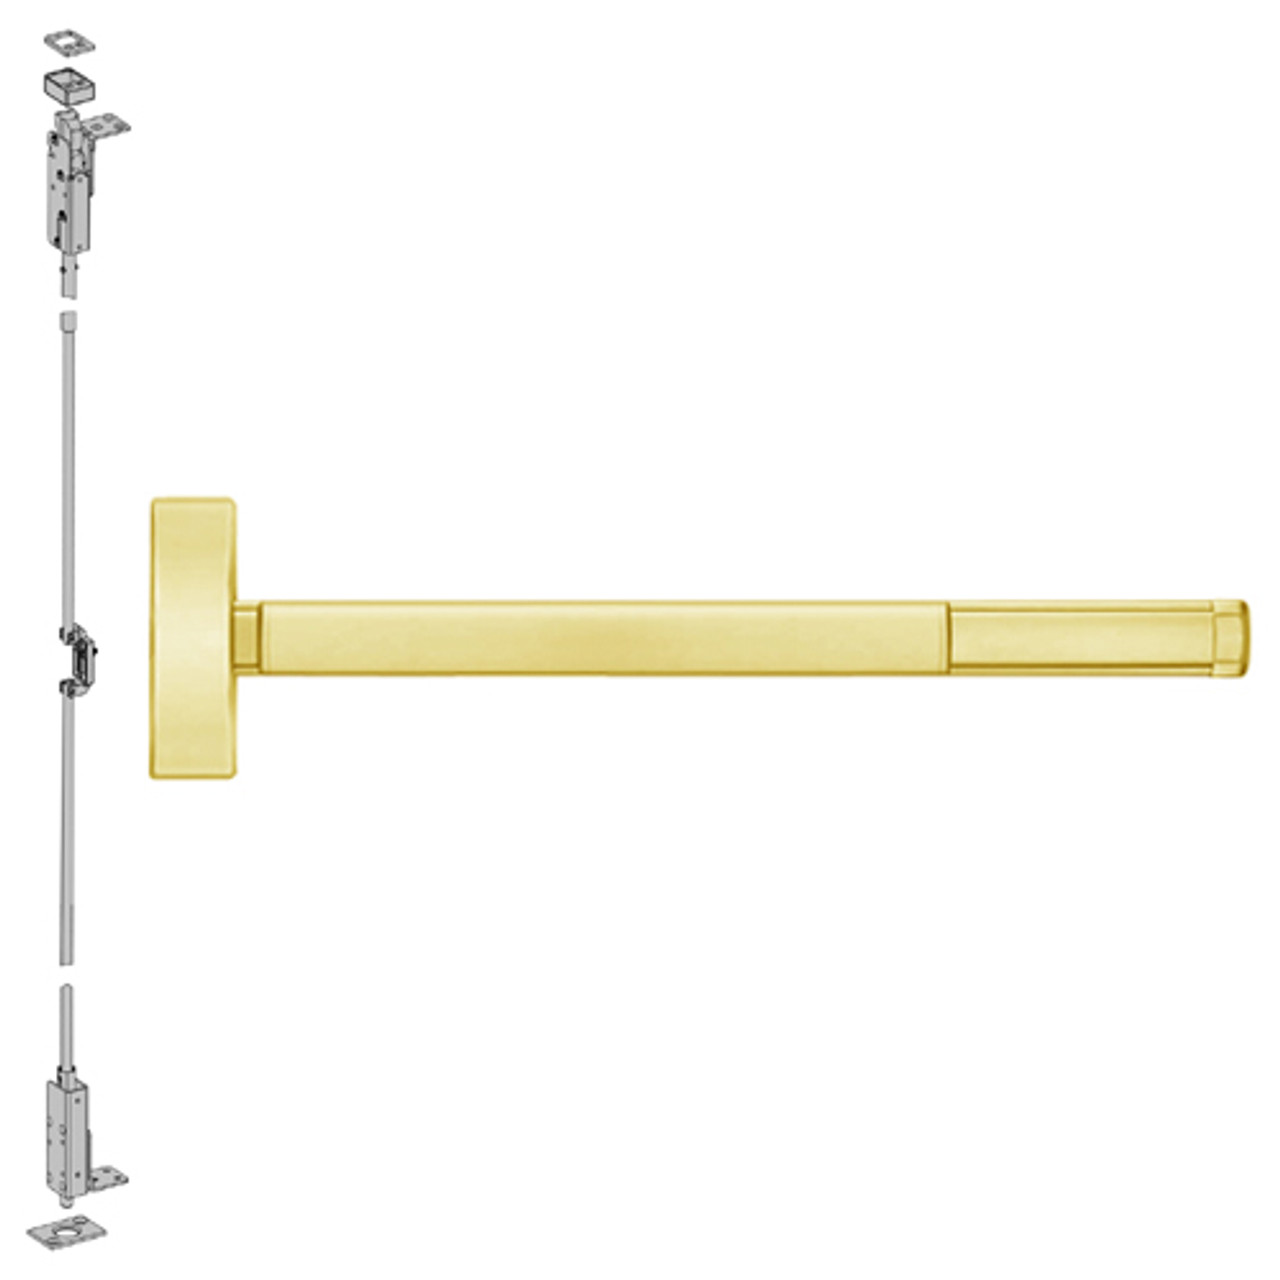 TSFL2702LBR-605-36 PHI 2700 Series Wood Door Concealed Vertical Exit Device with Touchbar Monitoring Switch Prepped for Dummy Trim in Bright Brass Finish